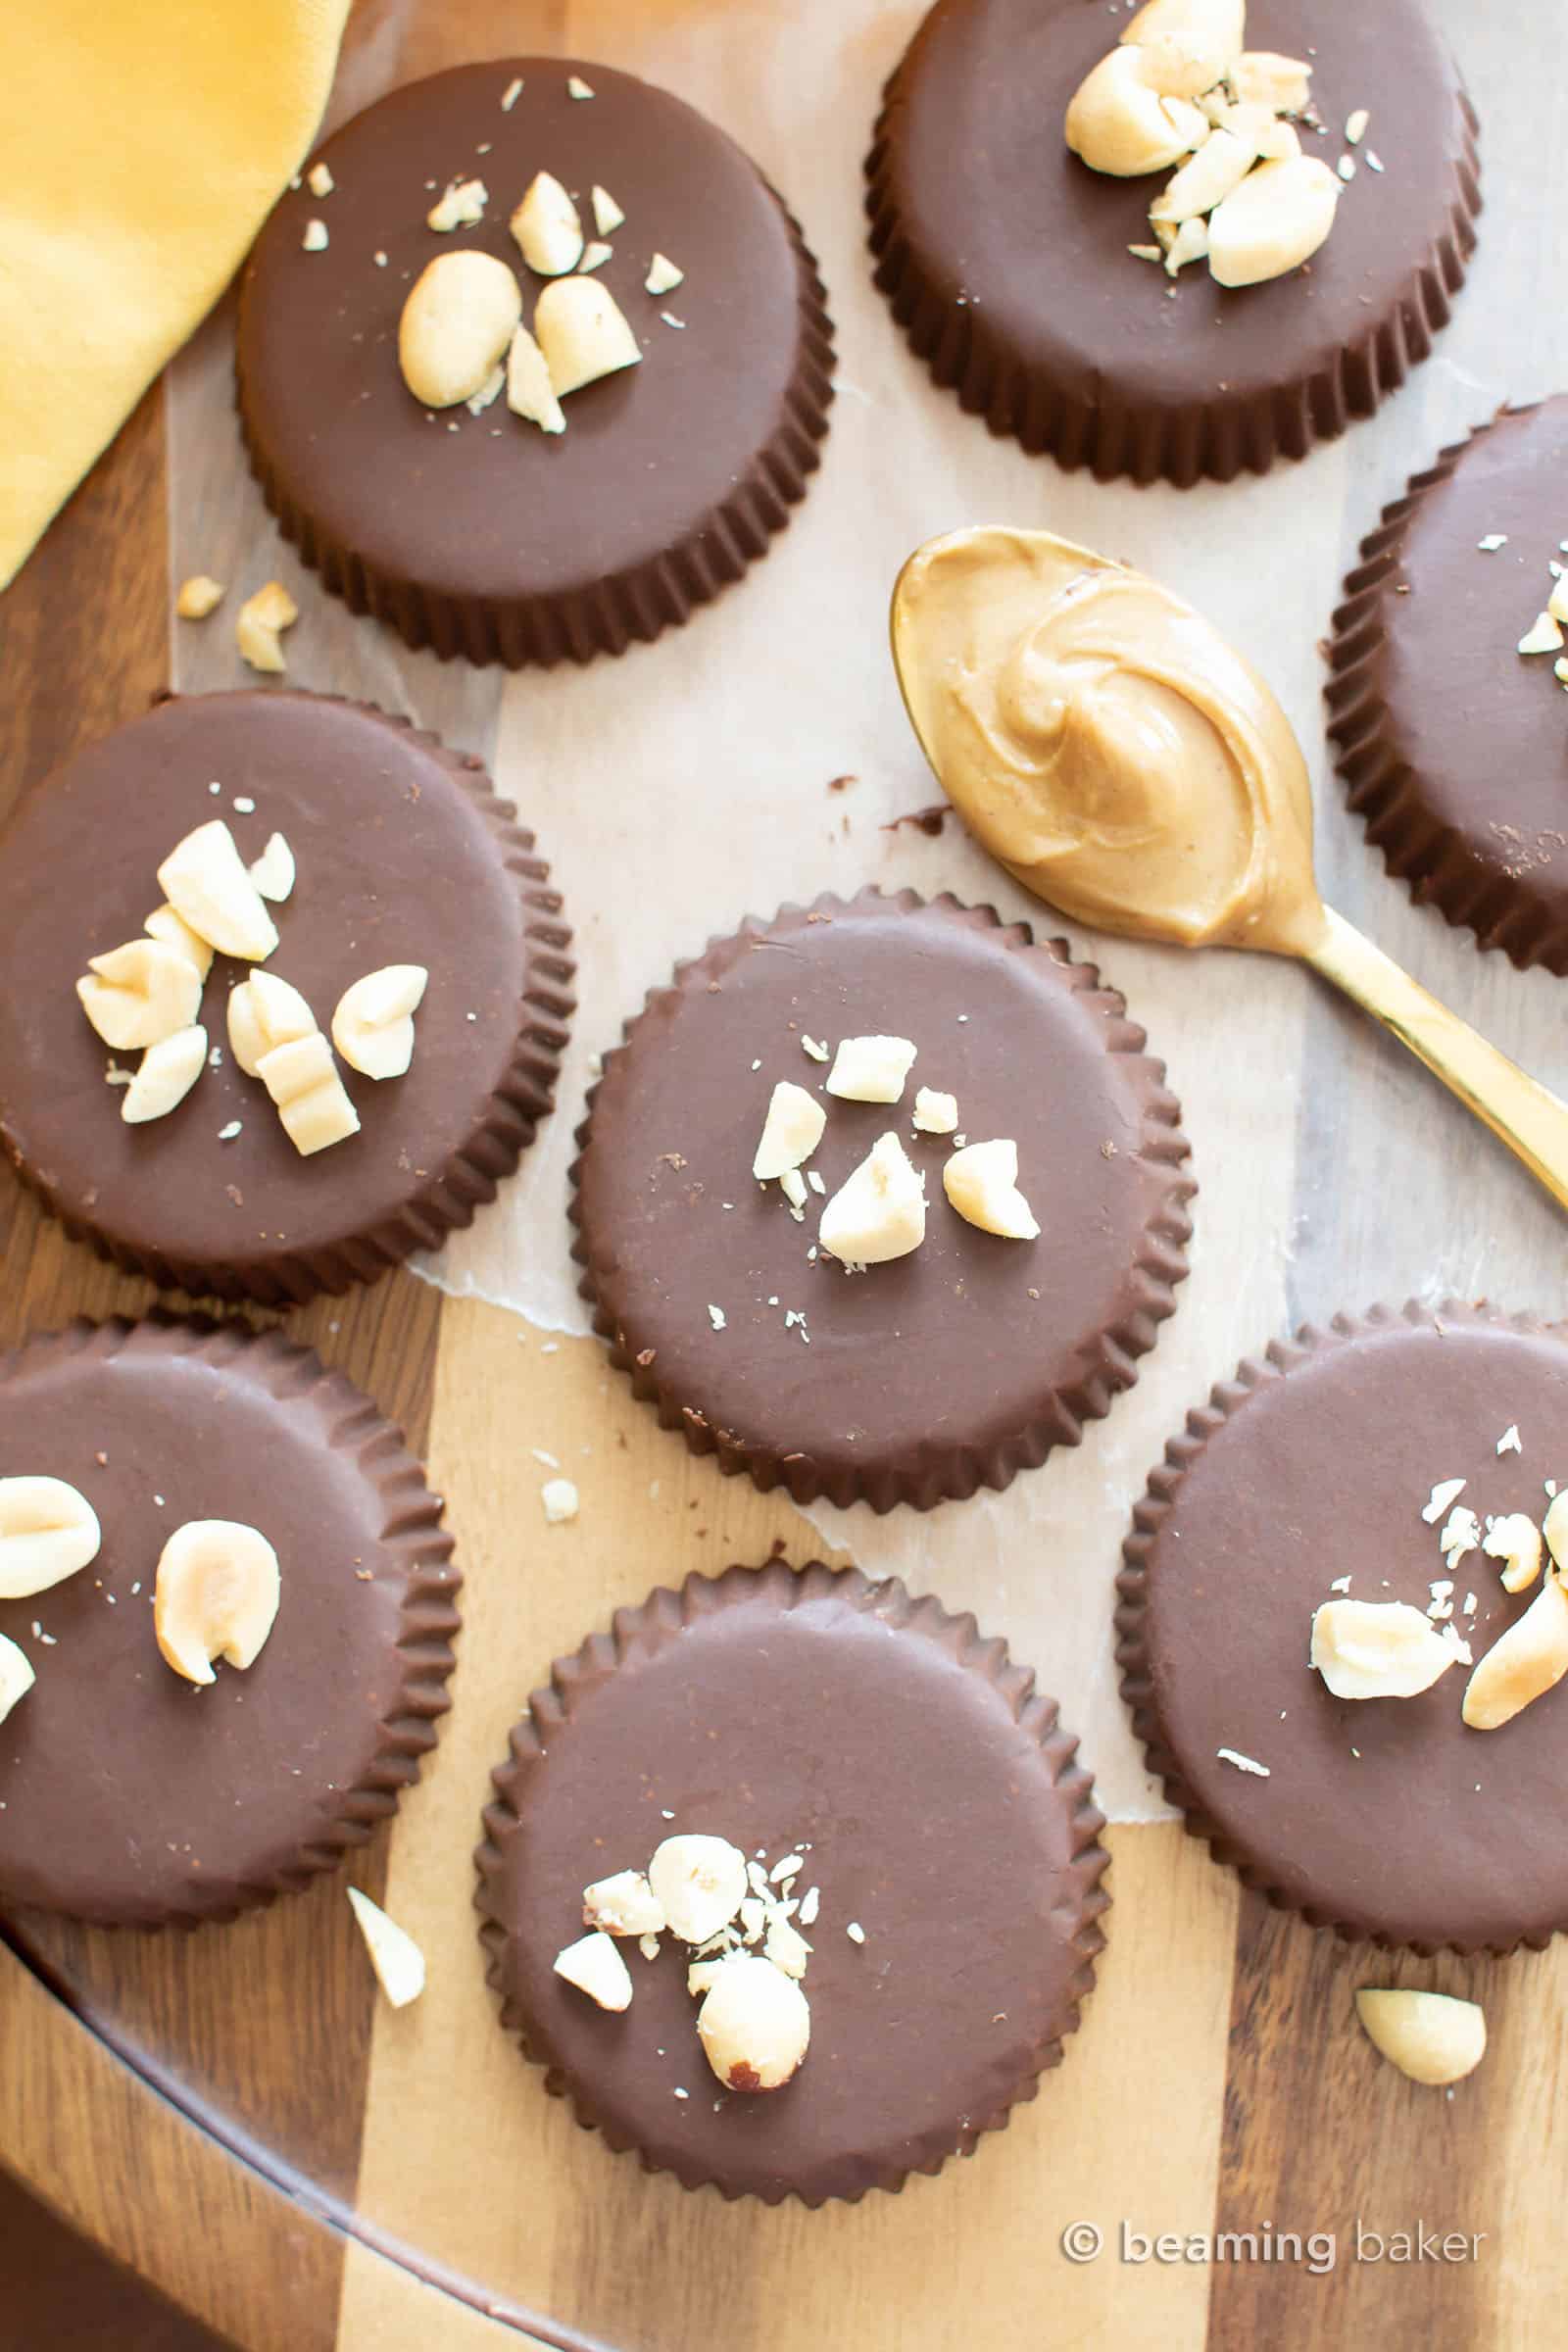 Keto Chocolate Peanut Butter Fudge Cups: this 5 Minute chocolate peanut butter fudge recipe is so easy! Just 2 ingredients for yummy cups of creamy, rich Low Carb fudge! #Keto #LowCarb #Vegan #Fudge #PeanutButter | Recipe at BeamingBaker.com